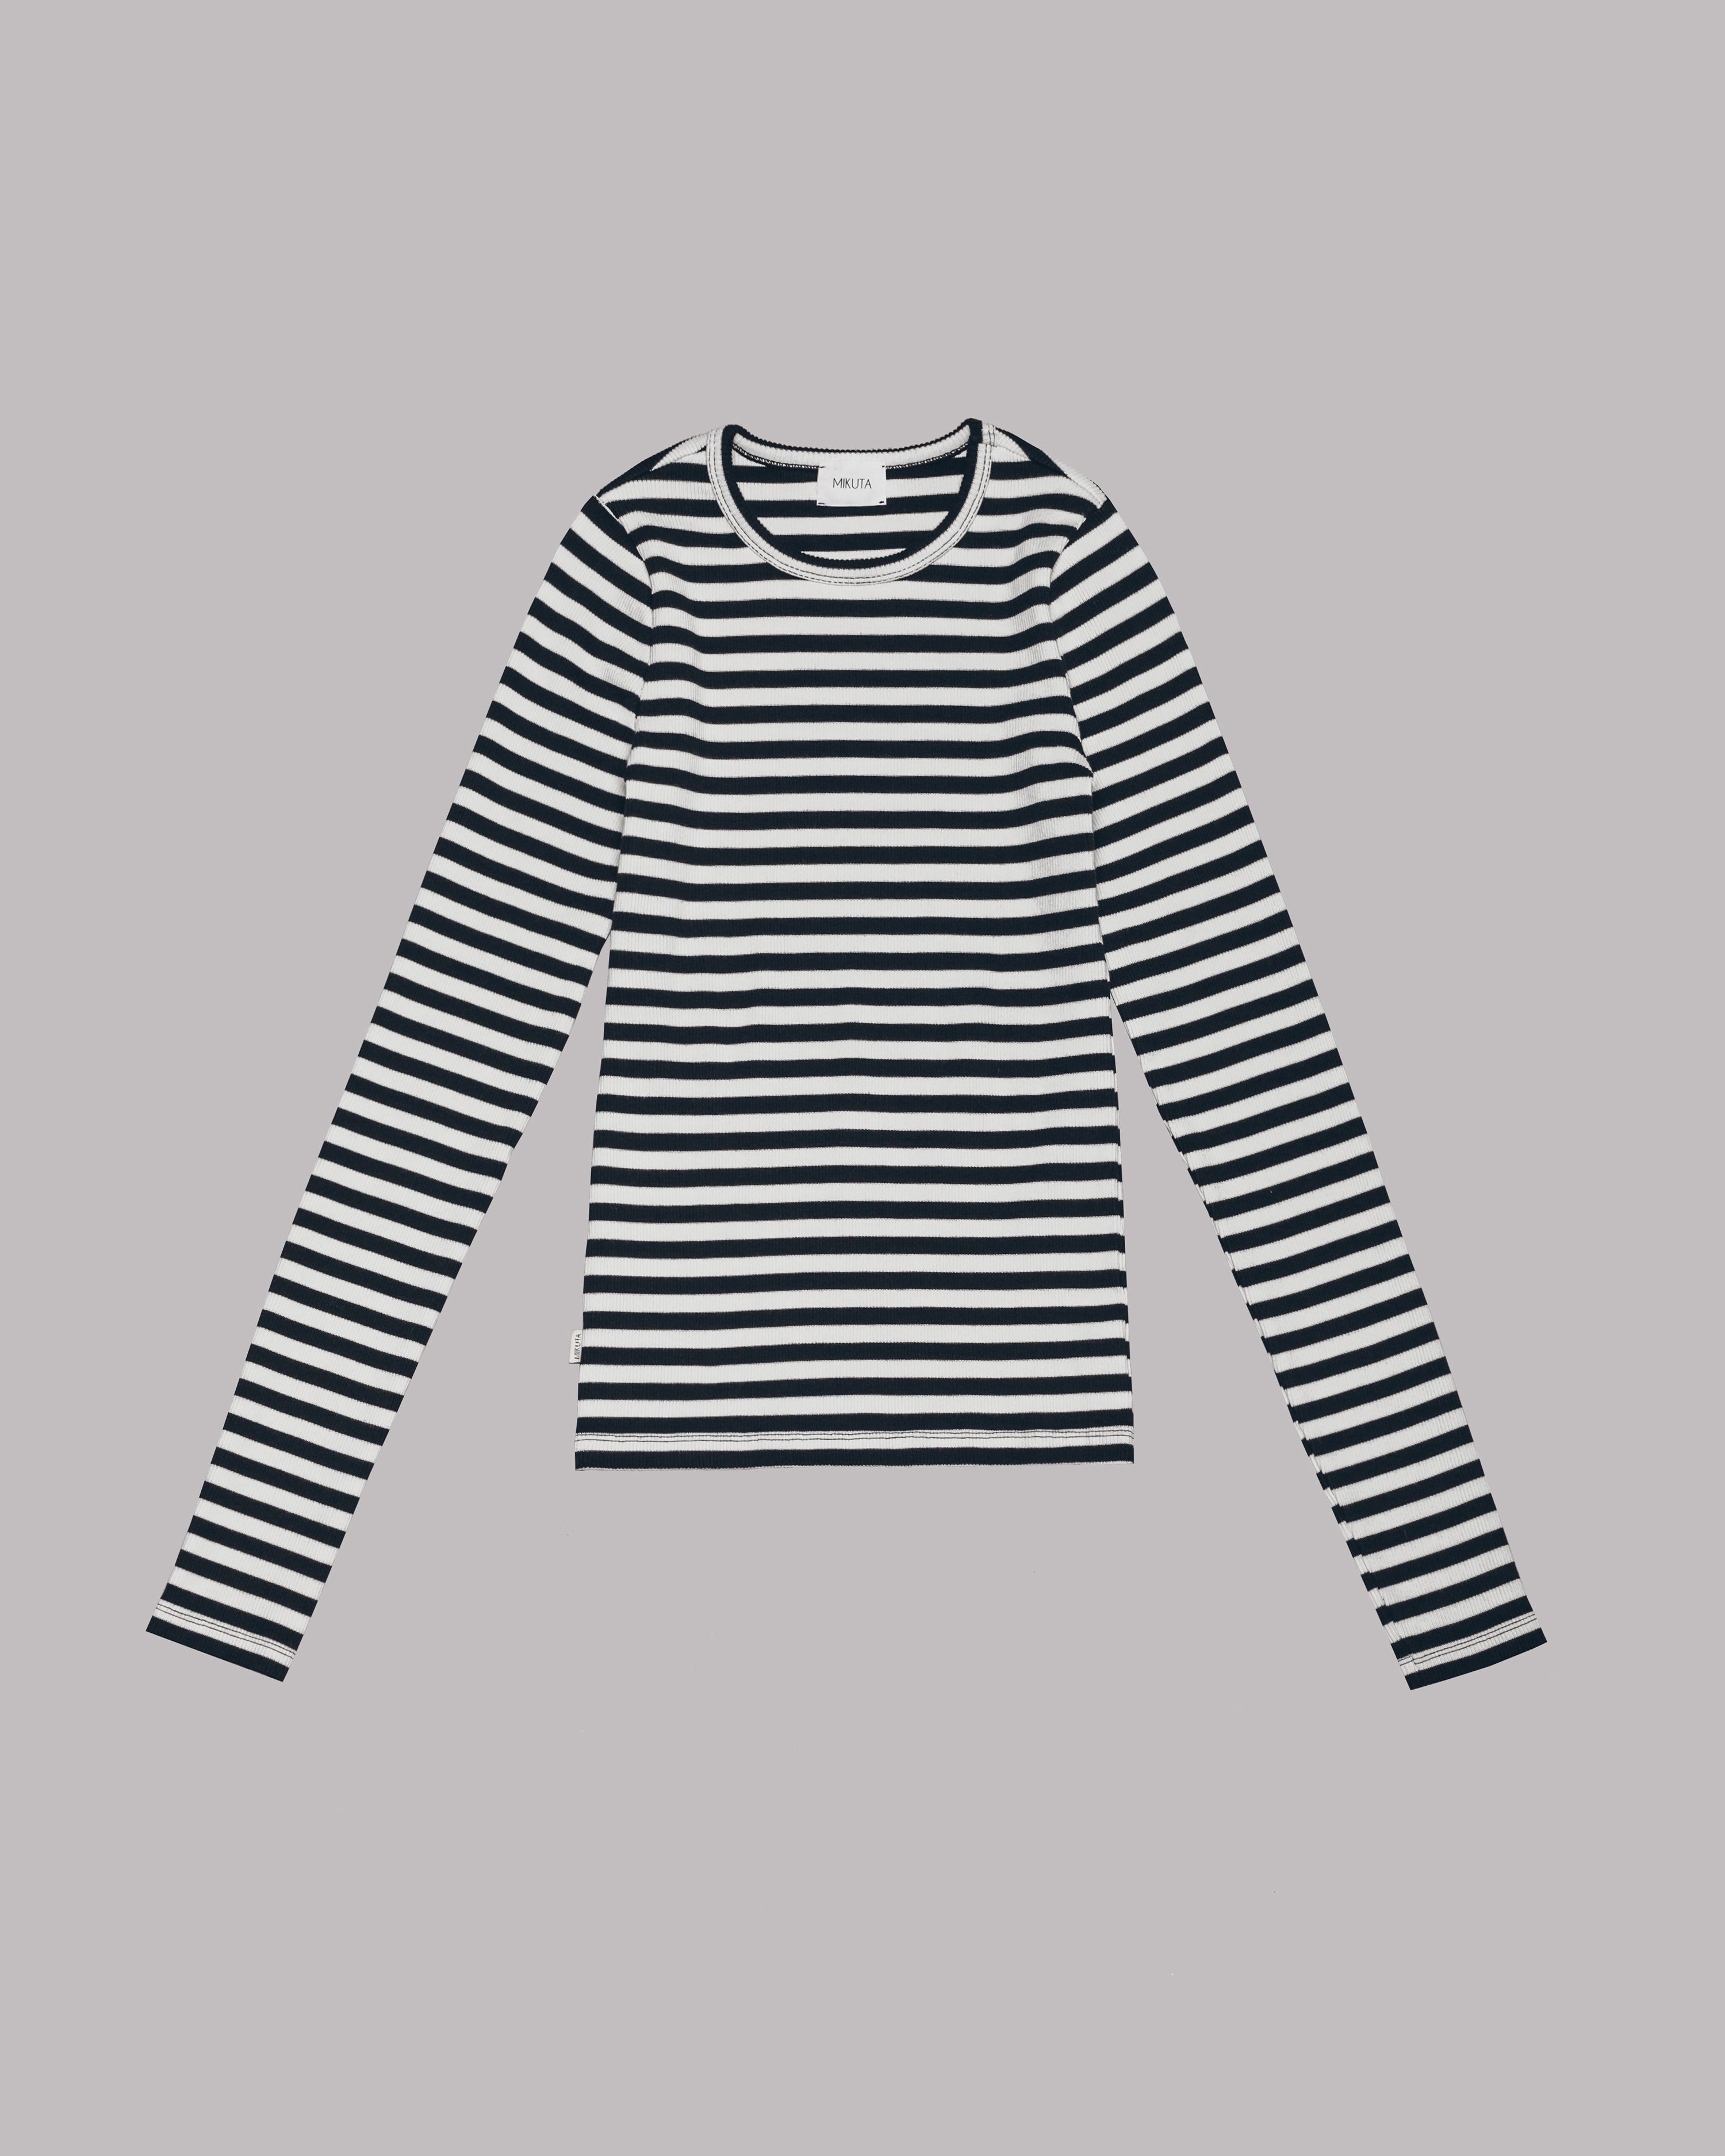 The Striped Ribbed Longsleeve